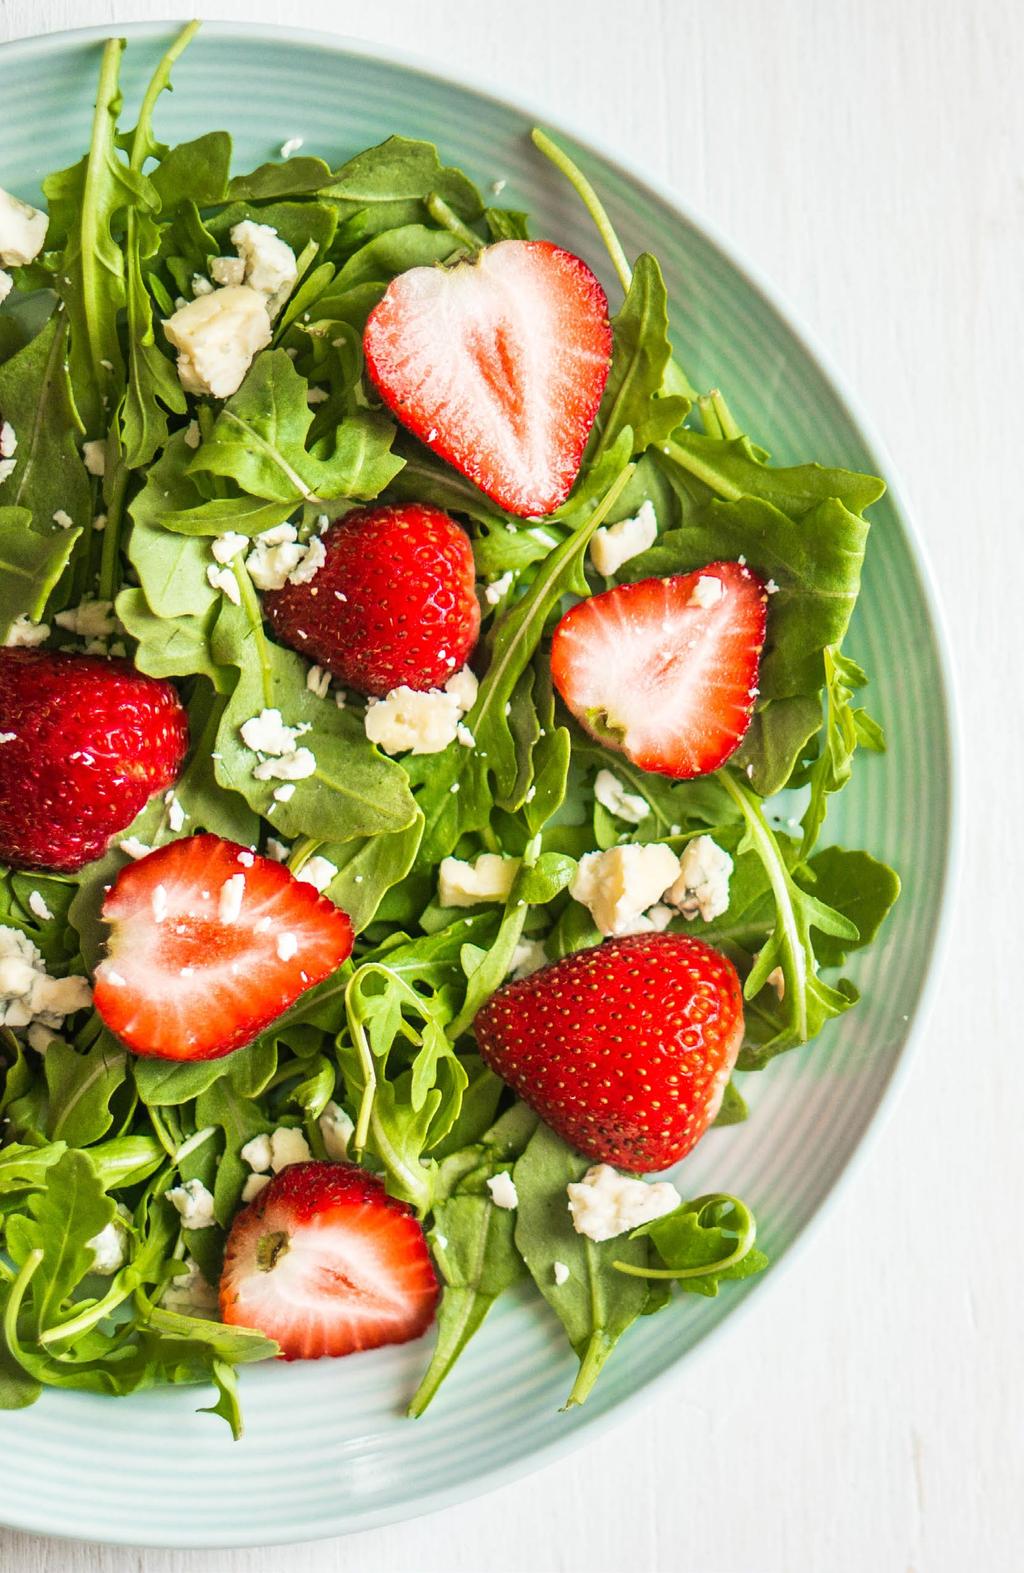 ARUGULA AND STRAWBERRY SALAD 2 SERVINGS 1 bunch arugula, washed, dried, and torn 1 cup fresh strawberries, washed, hulled, and cut into quarters or halves ½ - 1 tablespoon extra-virgin olive oil ½ -